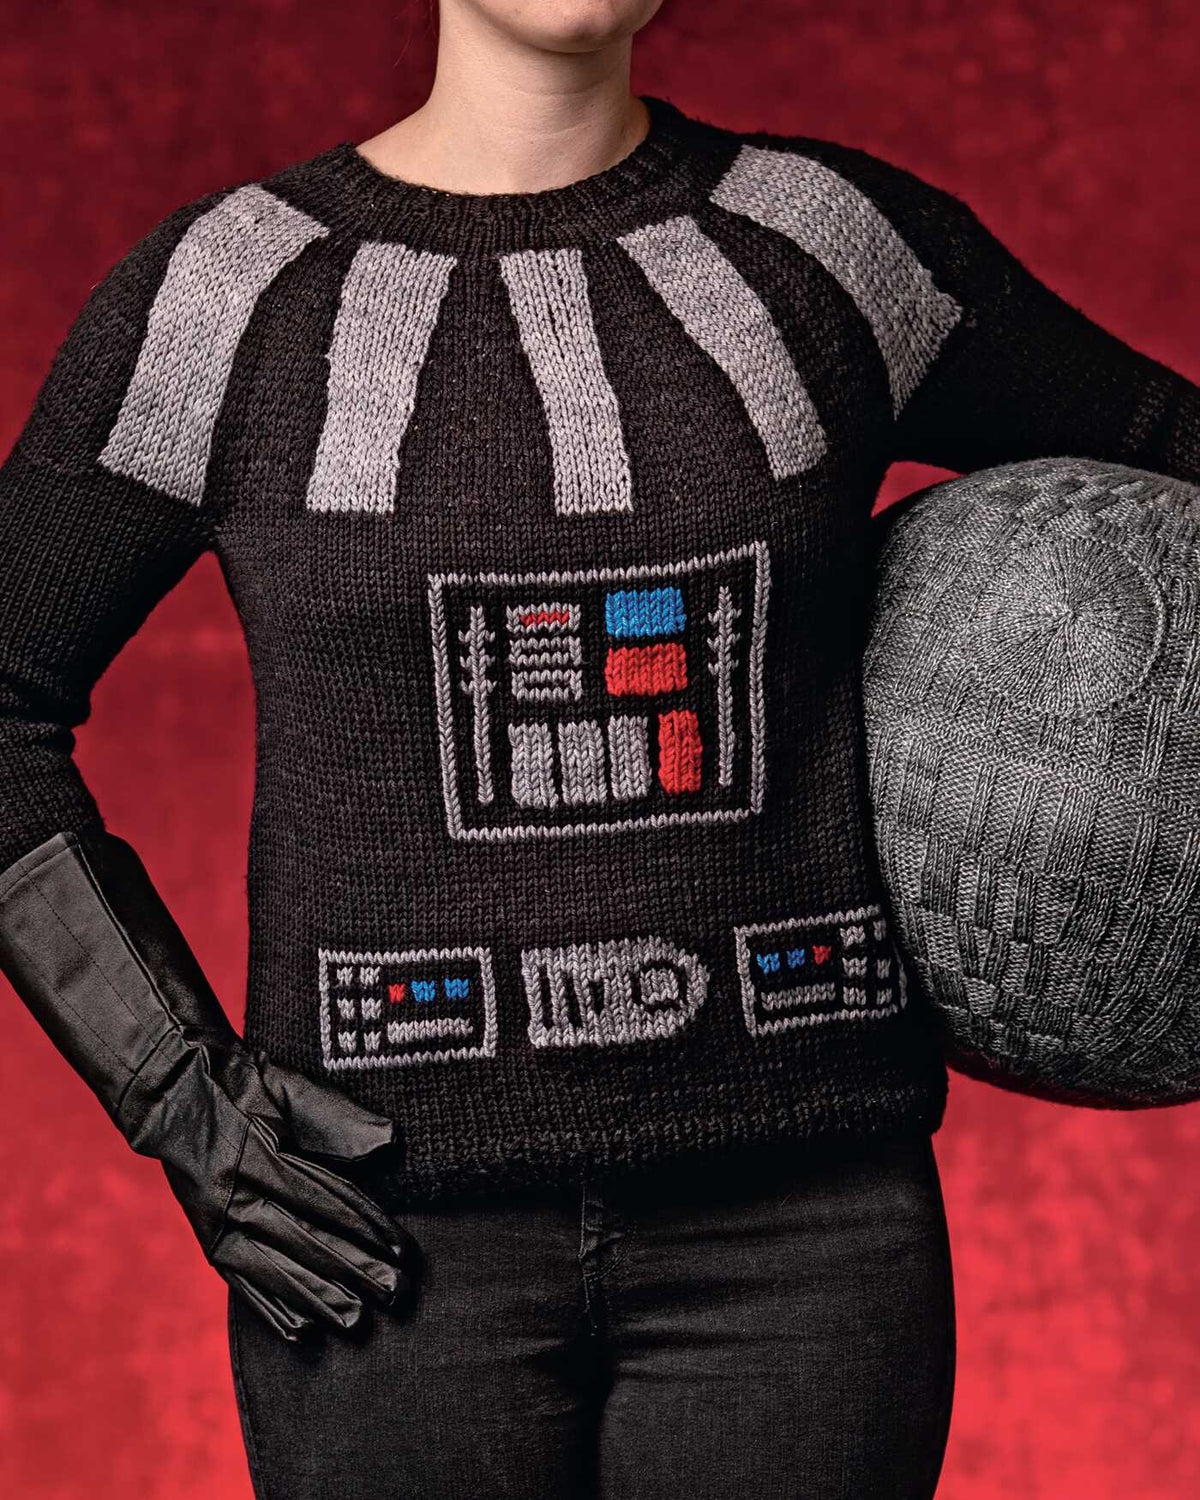 Star Wars Knitting the Galaxy by Tanis Gray